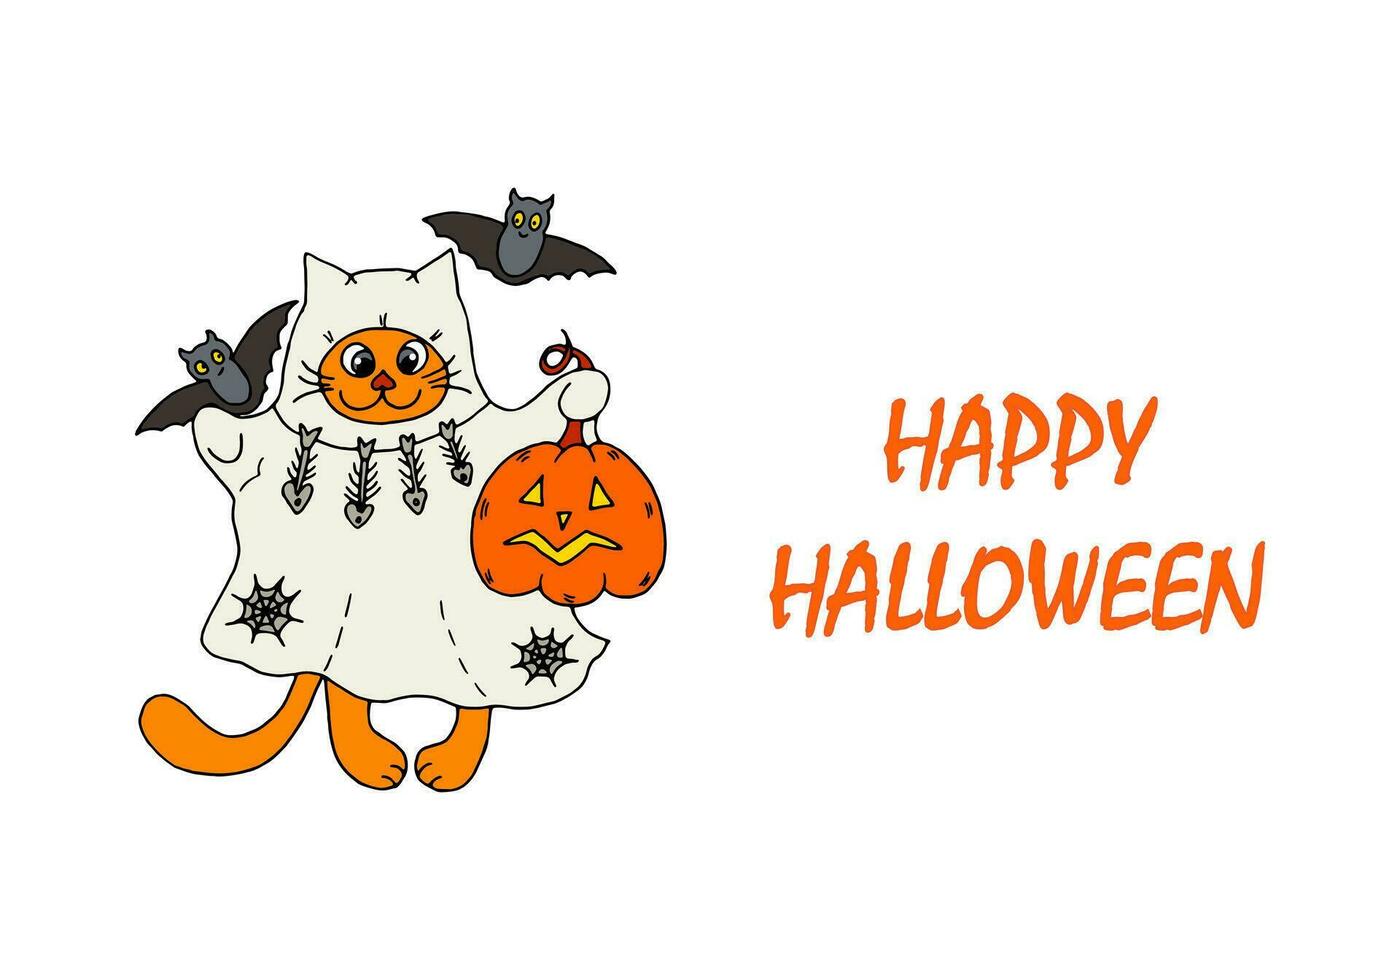 Cute ginger cartoon cat in a ghost costume with a pumpkin lantern and flying bats. Vector illustration greeting card or invitation for party Halloween